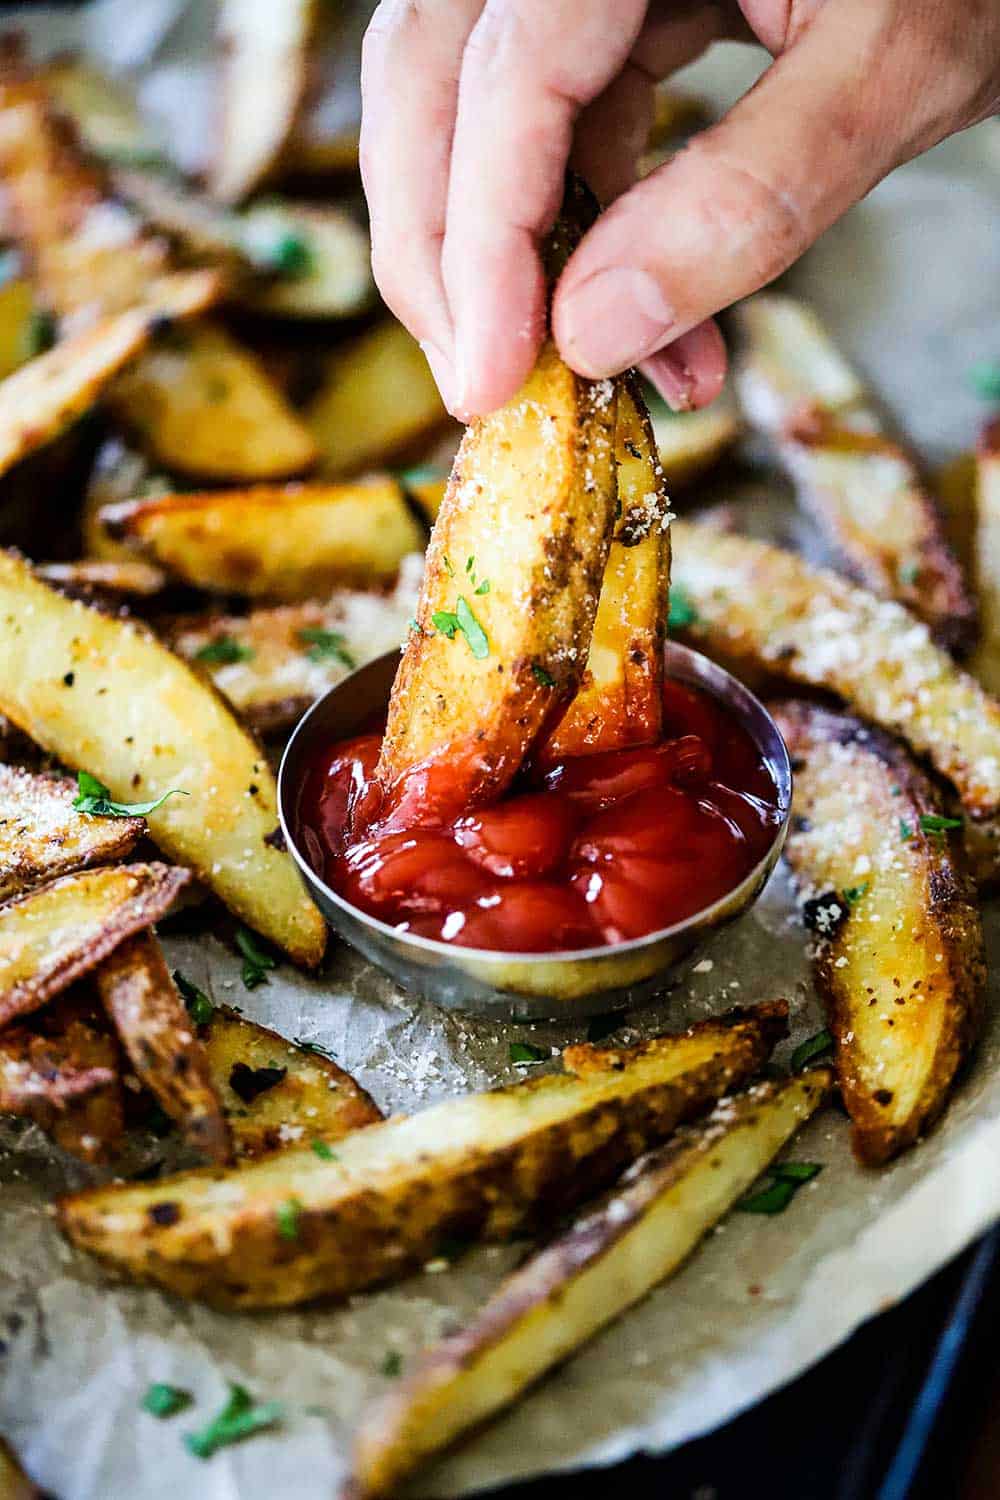 A person using his fingers to plunge to oven-roasted steak fries into a metal condiment holder filled with ketchup, all on a pan will with other fries.